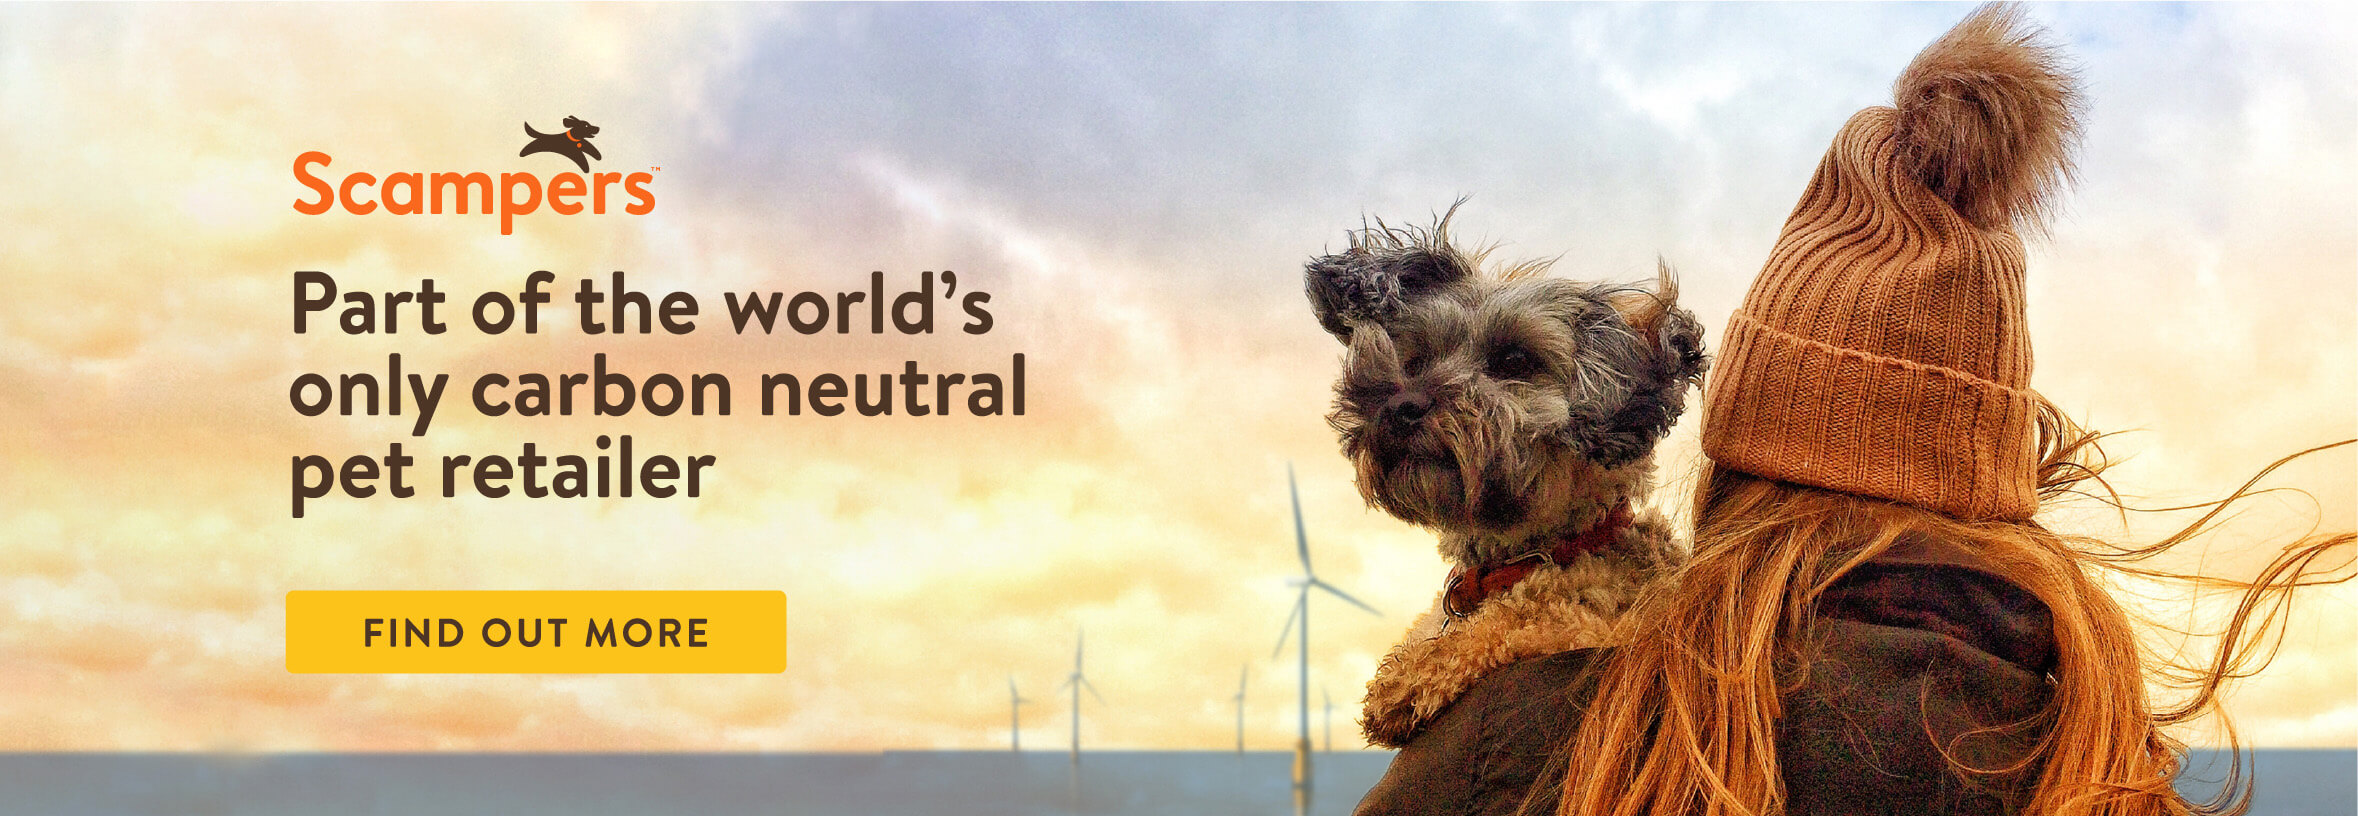 Part of the world's only carbon neutral pet retailer